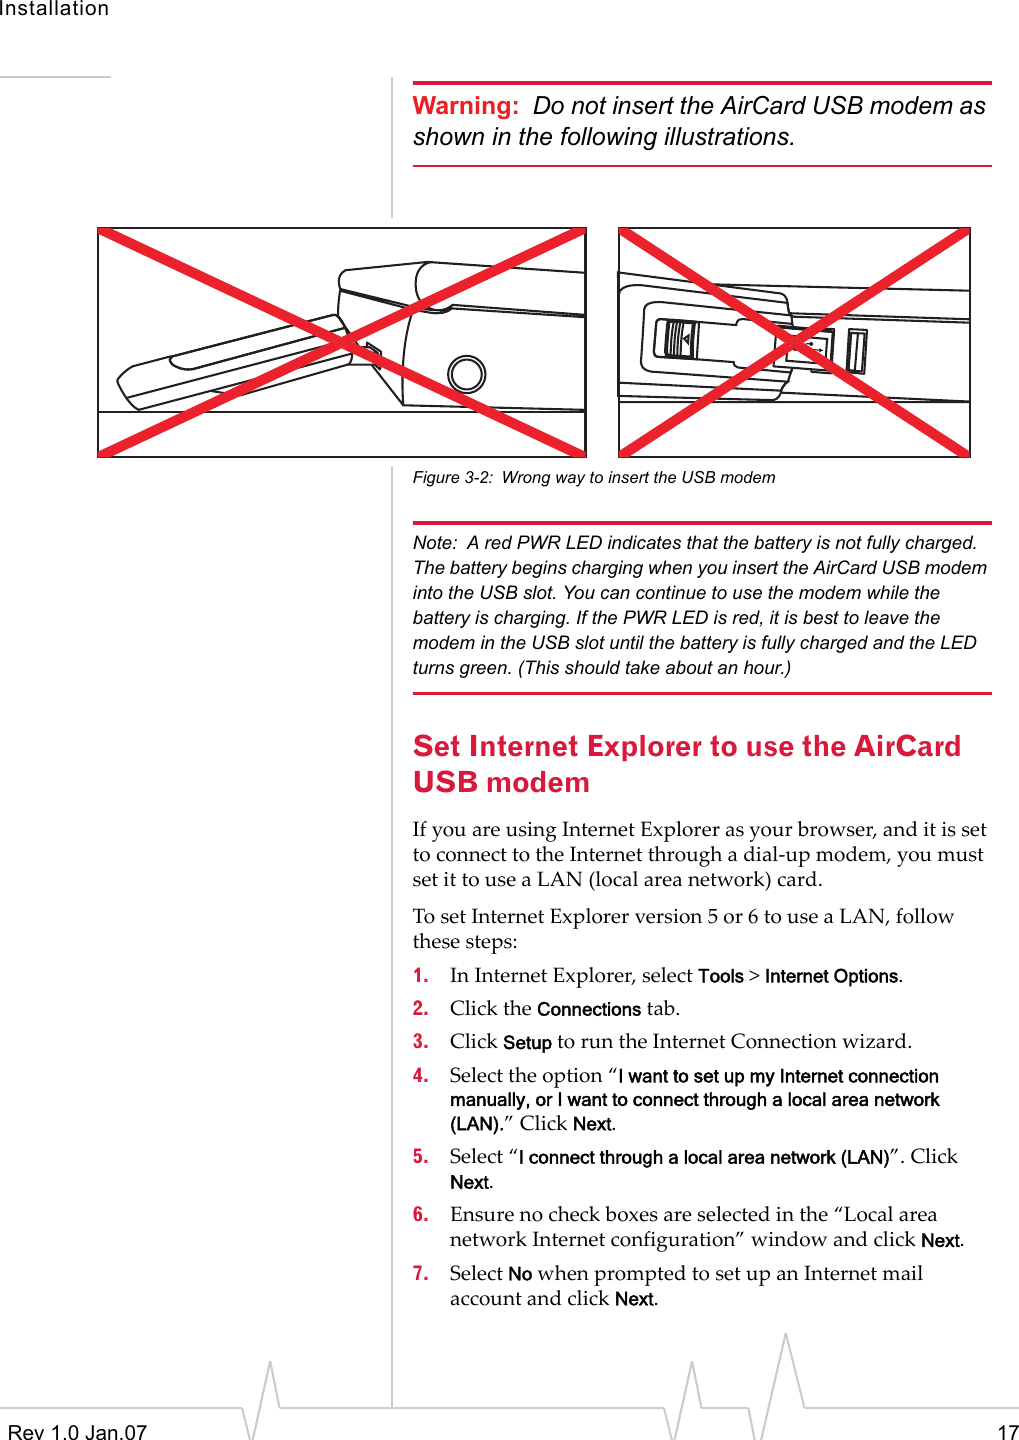 InstallationRev 1.0 Jan.07 17Warning: Do not insert the AirCard USB modem as shown in the following illustrations.Figure 3-2: Wrong way to insert the USB modemNote: A red PWR LED indicates that the battery is not fully charged. The battery begins charging when you insert the AirCard USB modem into the USB slot. You can continue to use the modem while the battery is charging. If the PWR LED is red, it is best to leave the modem in the USB slot until the battery is fully charged and the LED turns green. (This should take about an hour.)Set Internet Explorer to use the AirCard USB modemIfyouareusingInternetExplorerasyourbrowser,anditissettoconnecttotheInternetthroughadial‐upmodem,youmustsetittouseaLAN(localareanetwork)card.TosetInternetExplorerversion5or6touseaLAN,followthesesteps:1. InInternetExplorer,selectTools&gt;Internet Options.2. ClicktheConnectionstab.3. ClickSetuptoruntheInternetConnectionwizard.4. Selecttheoption“I want to set up my Internet connection manually, or I want to connect through a local area network (LAN).”ClickNext.5. Select“I connect through a local area network (LAN)”.ClickNext.6. Ensurenocheckboxesareselectedinthe“LocalareanetworkInternetconfiguration”windowandclickNext.7. SelectNowhenpromptedtosetupanInternetmailaccountandclickNext.